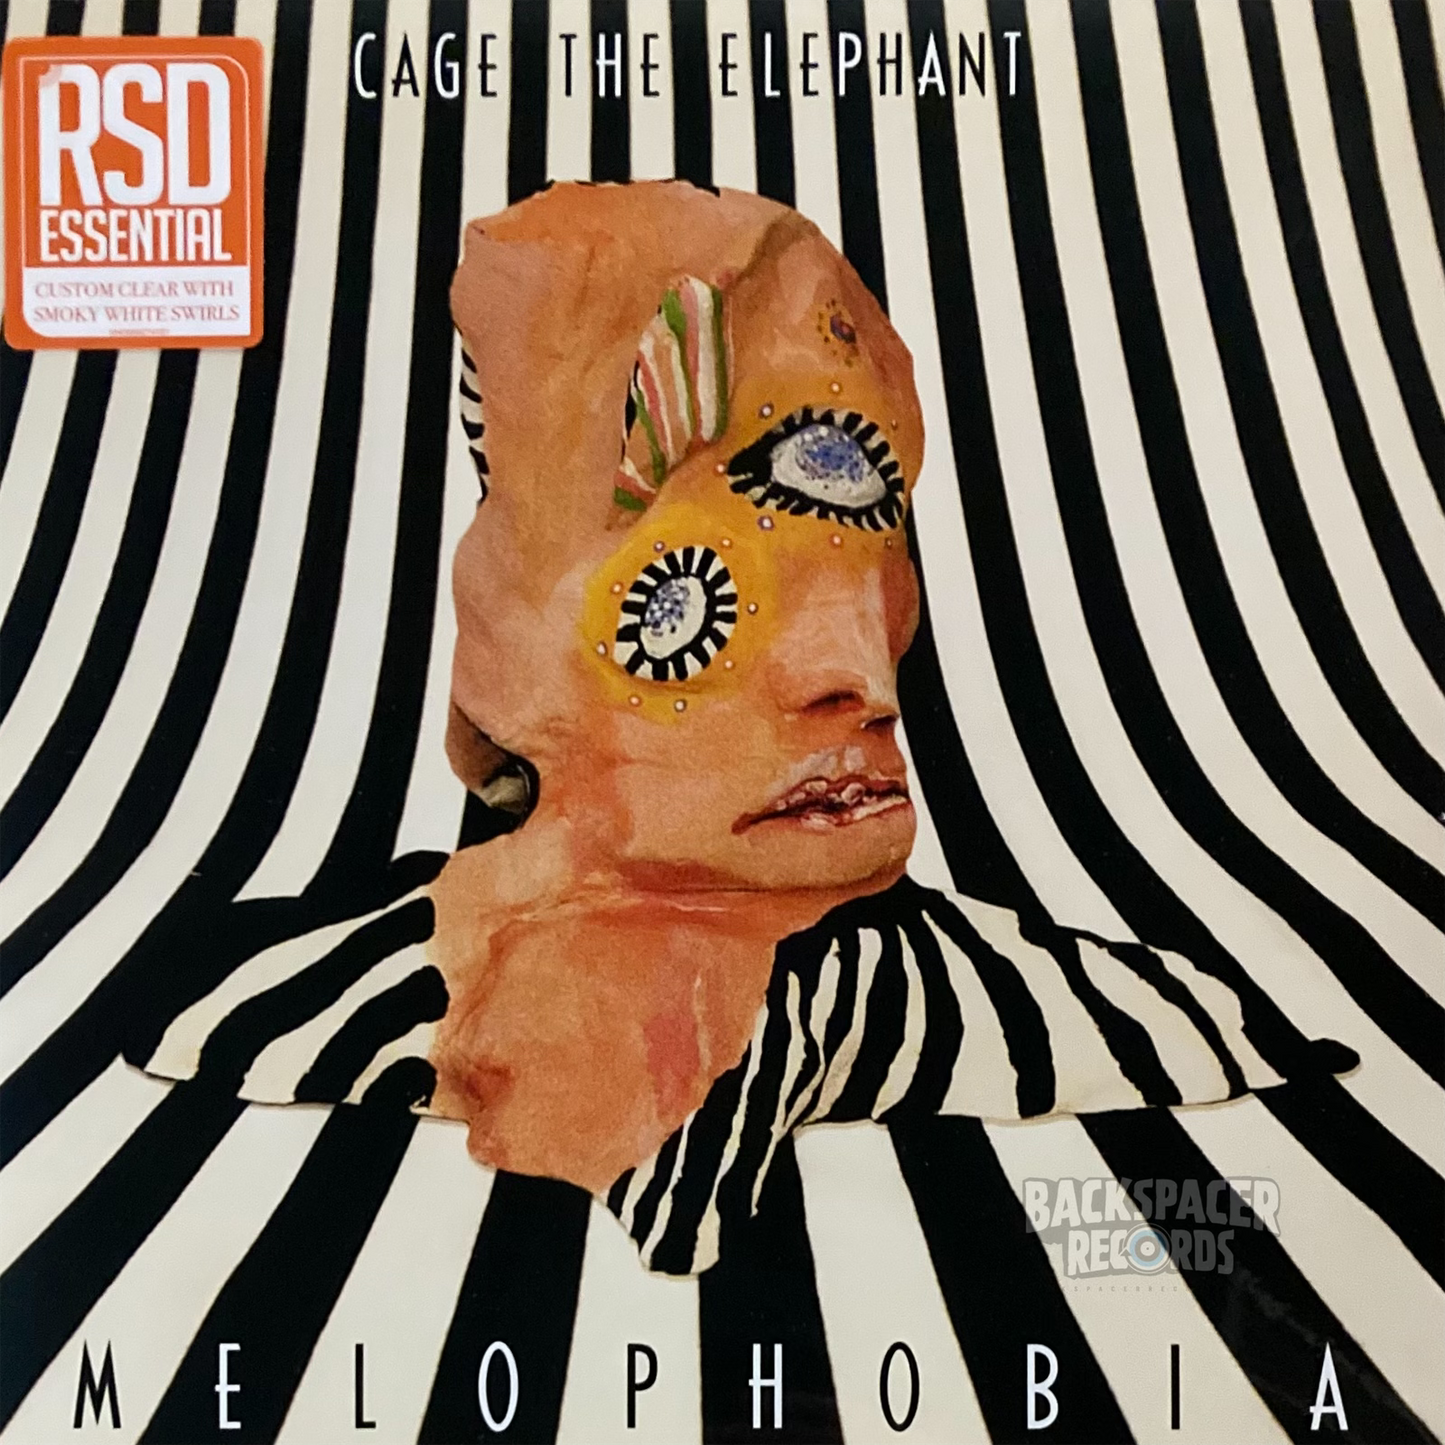 Cage The Elephant – Melophobia (Limited Edition) LP (Sealed)